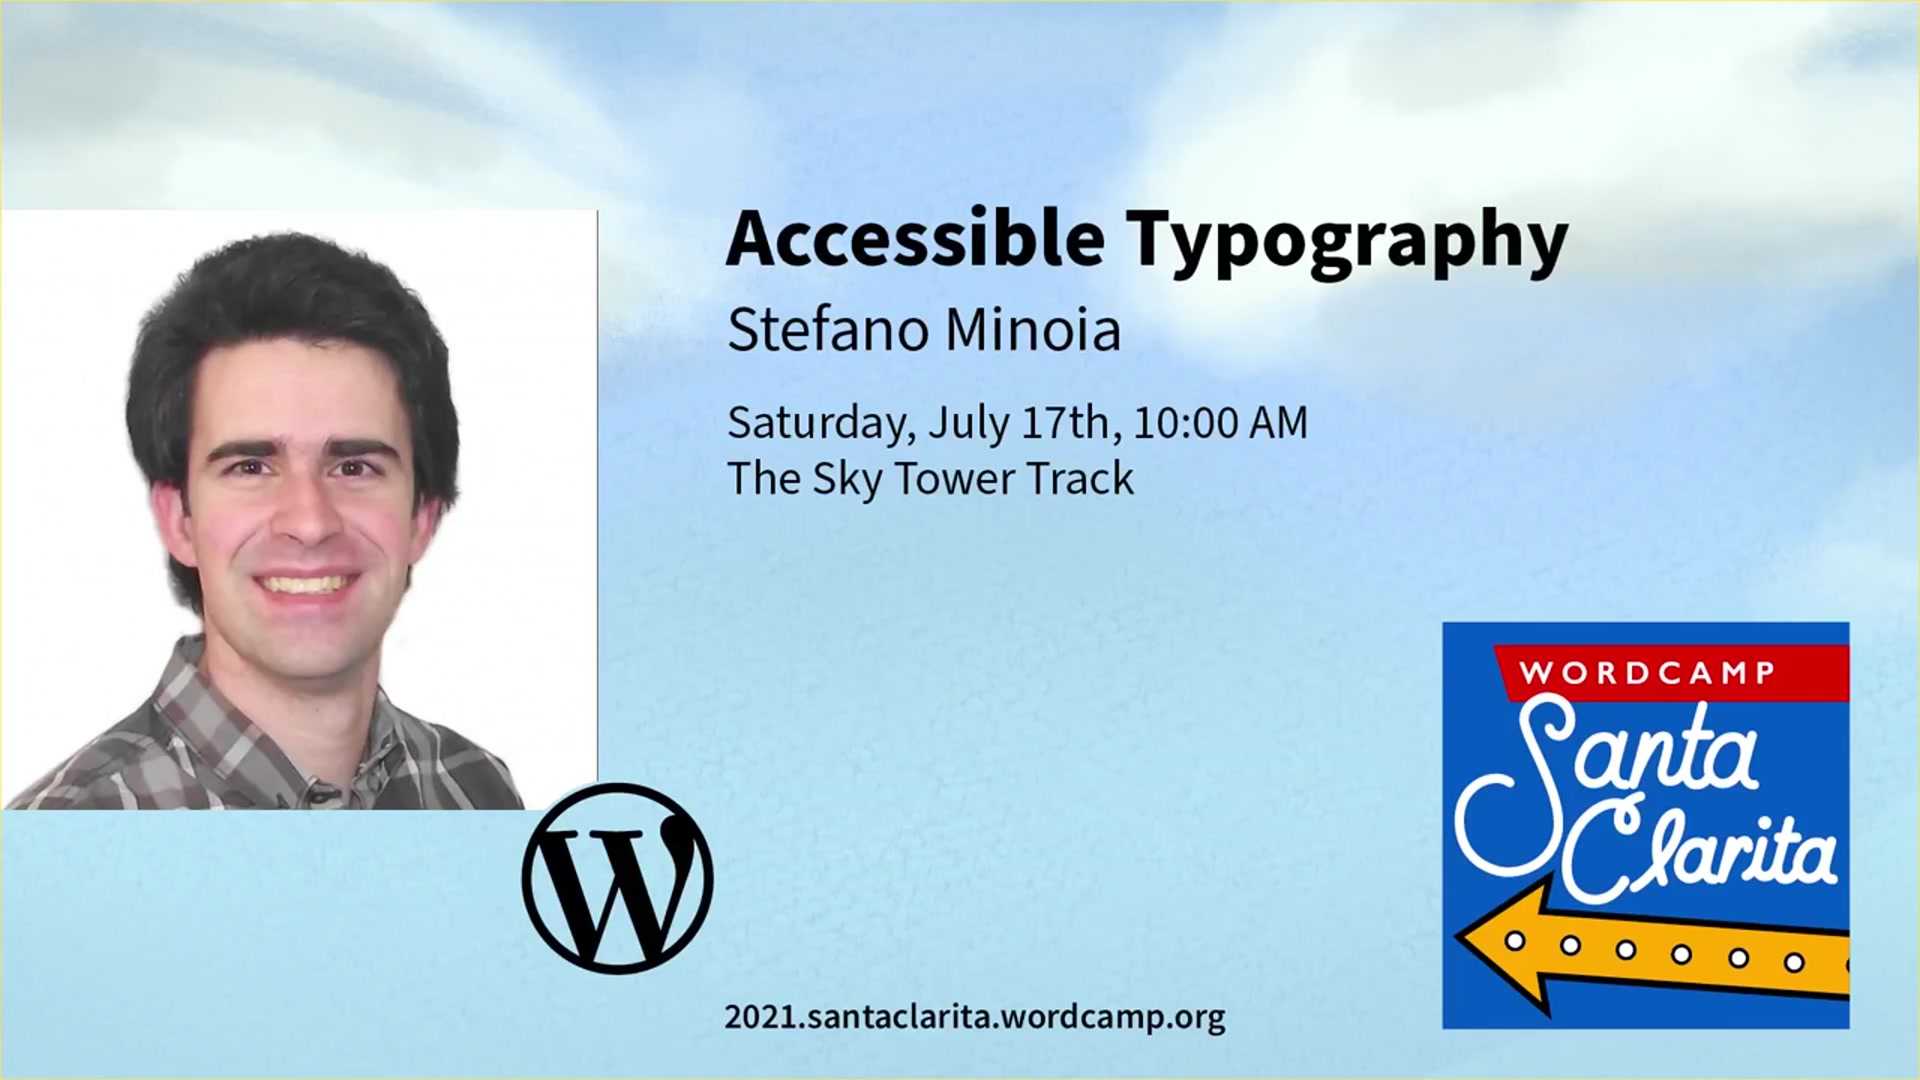 Stefano Minoia: Accessible Typography